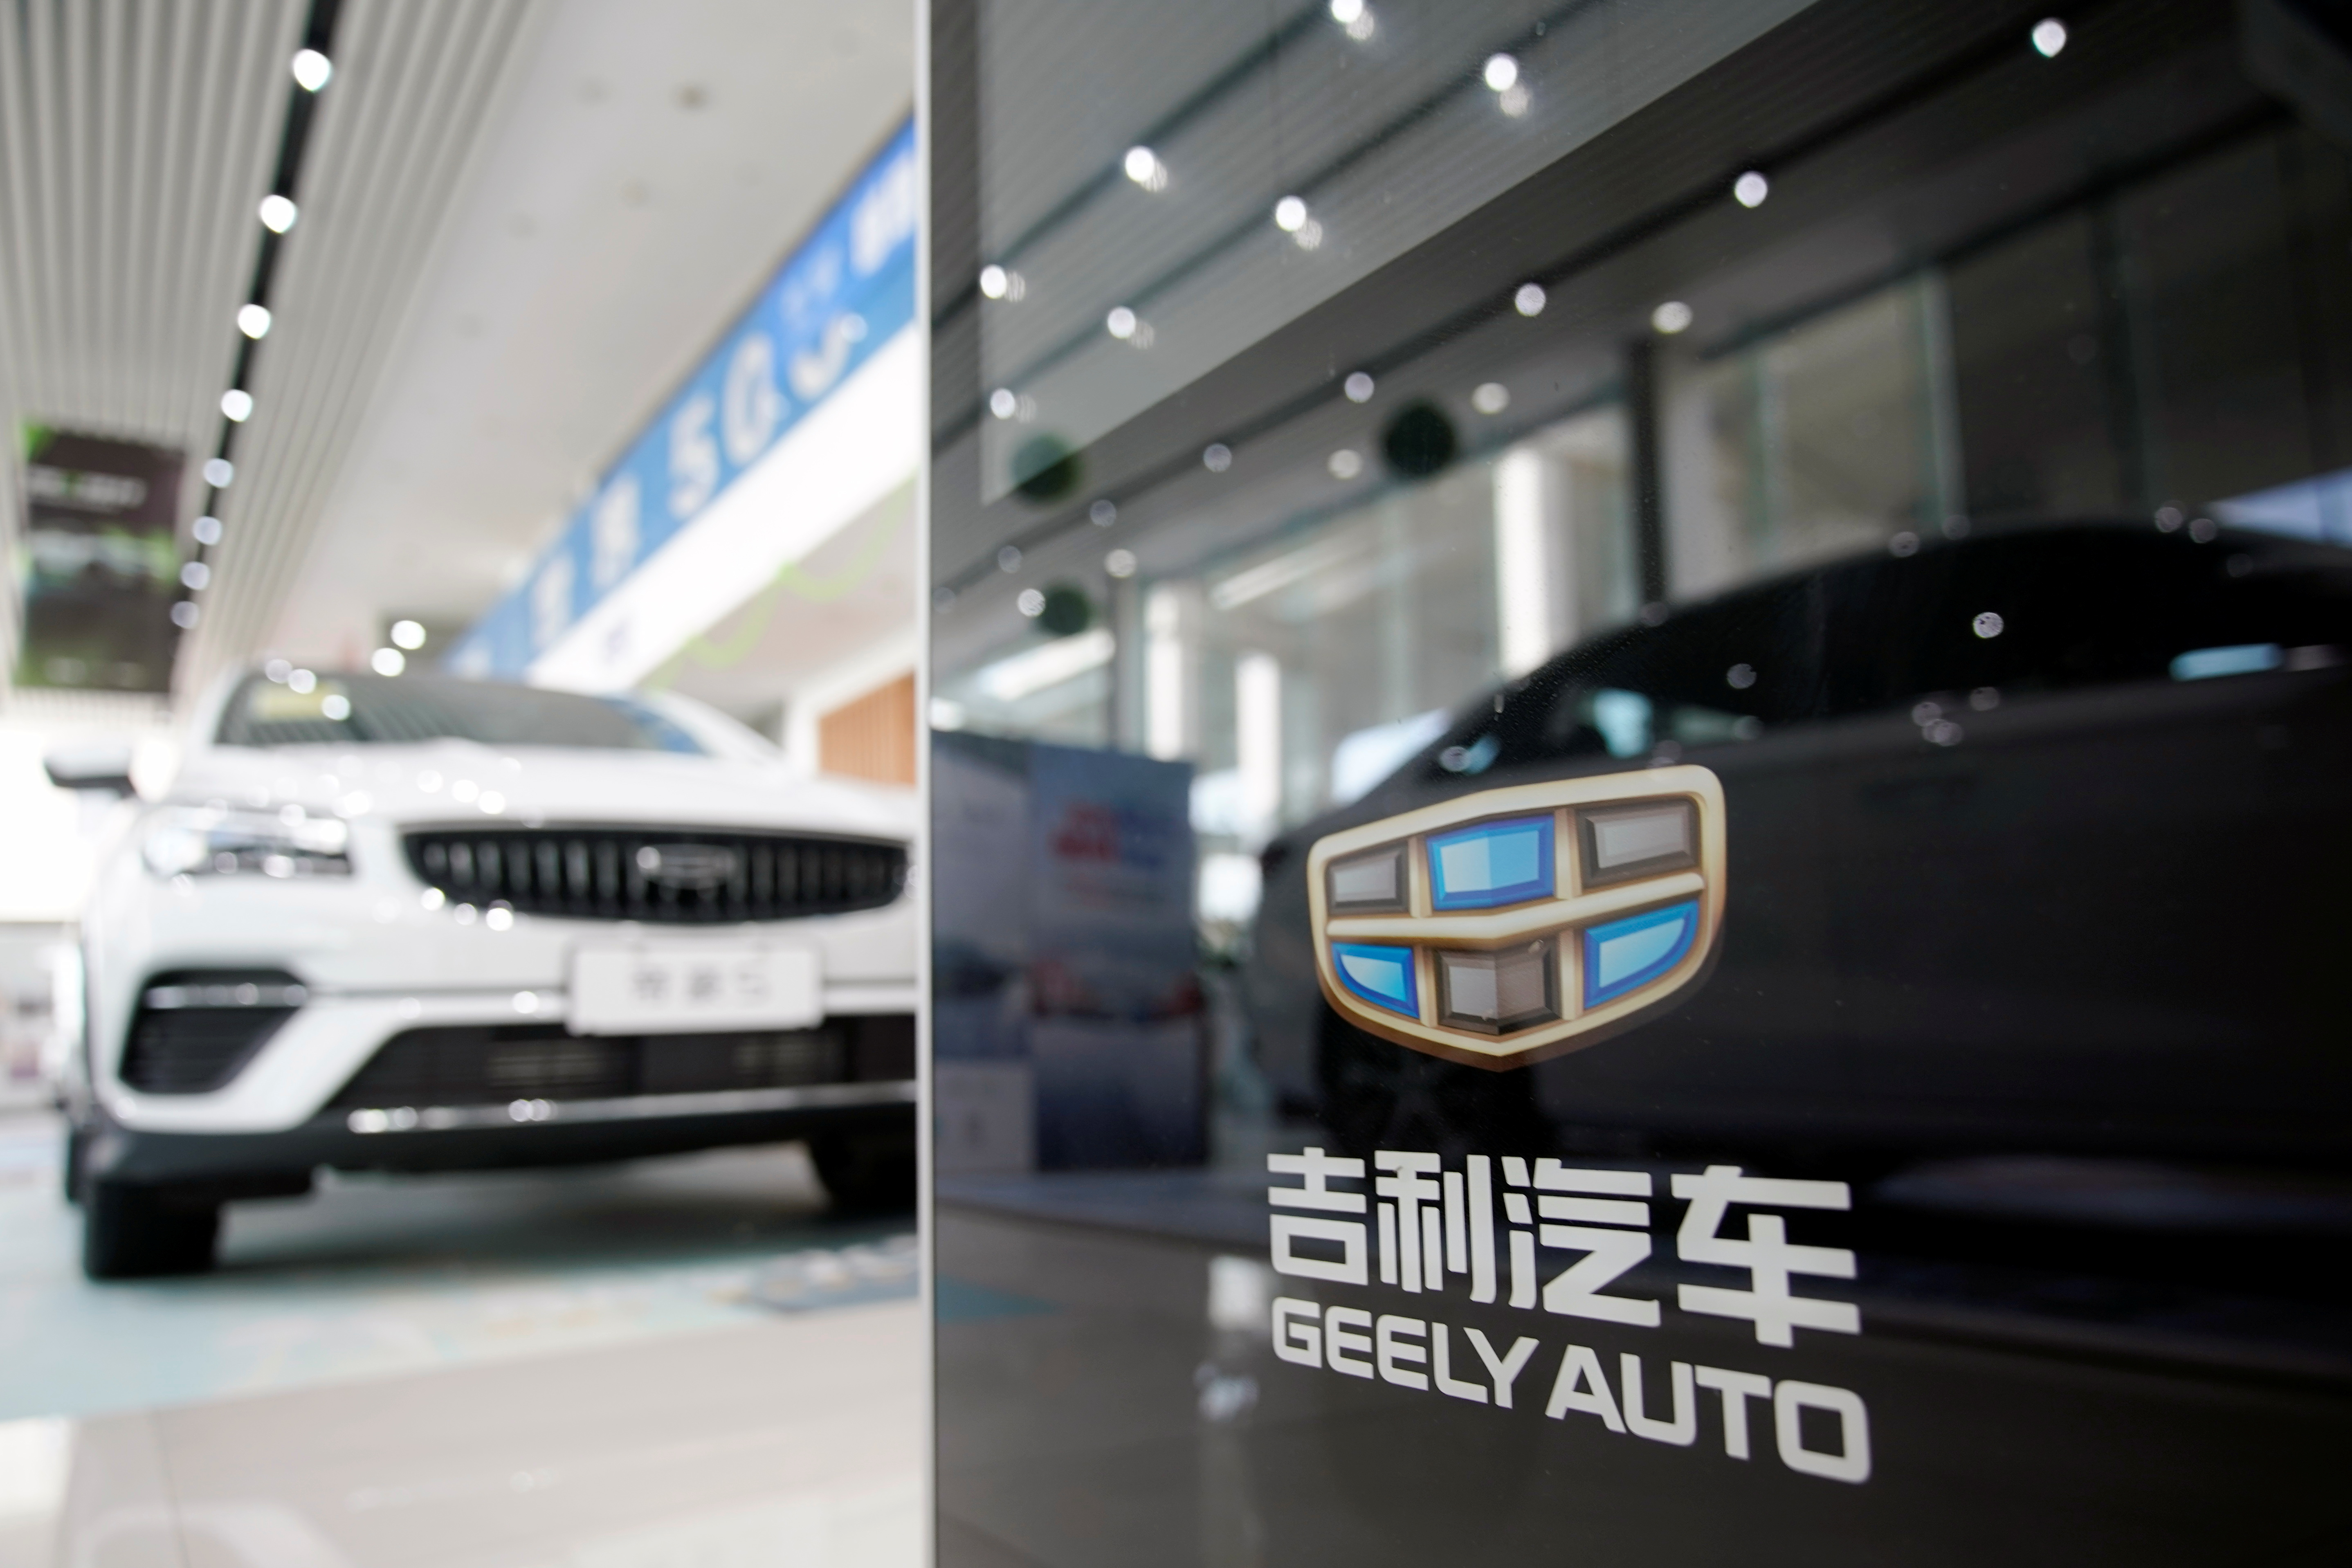 The Geely logo is seen at a car dealership in Shanghai